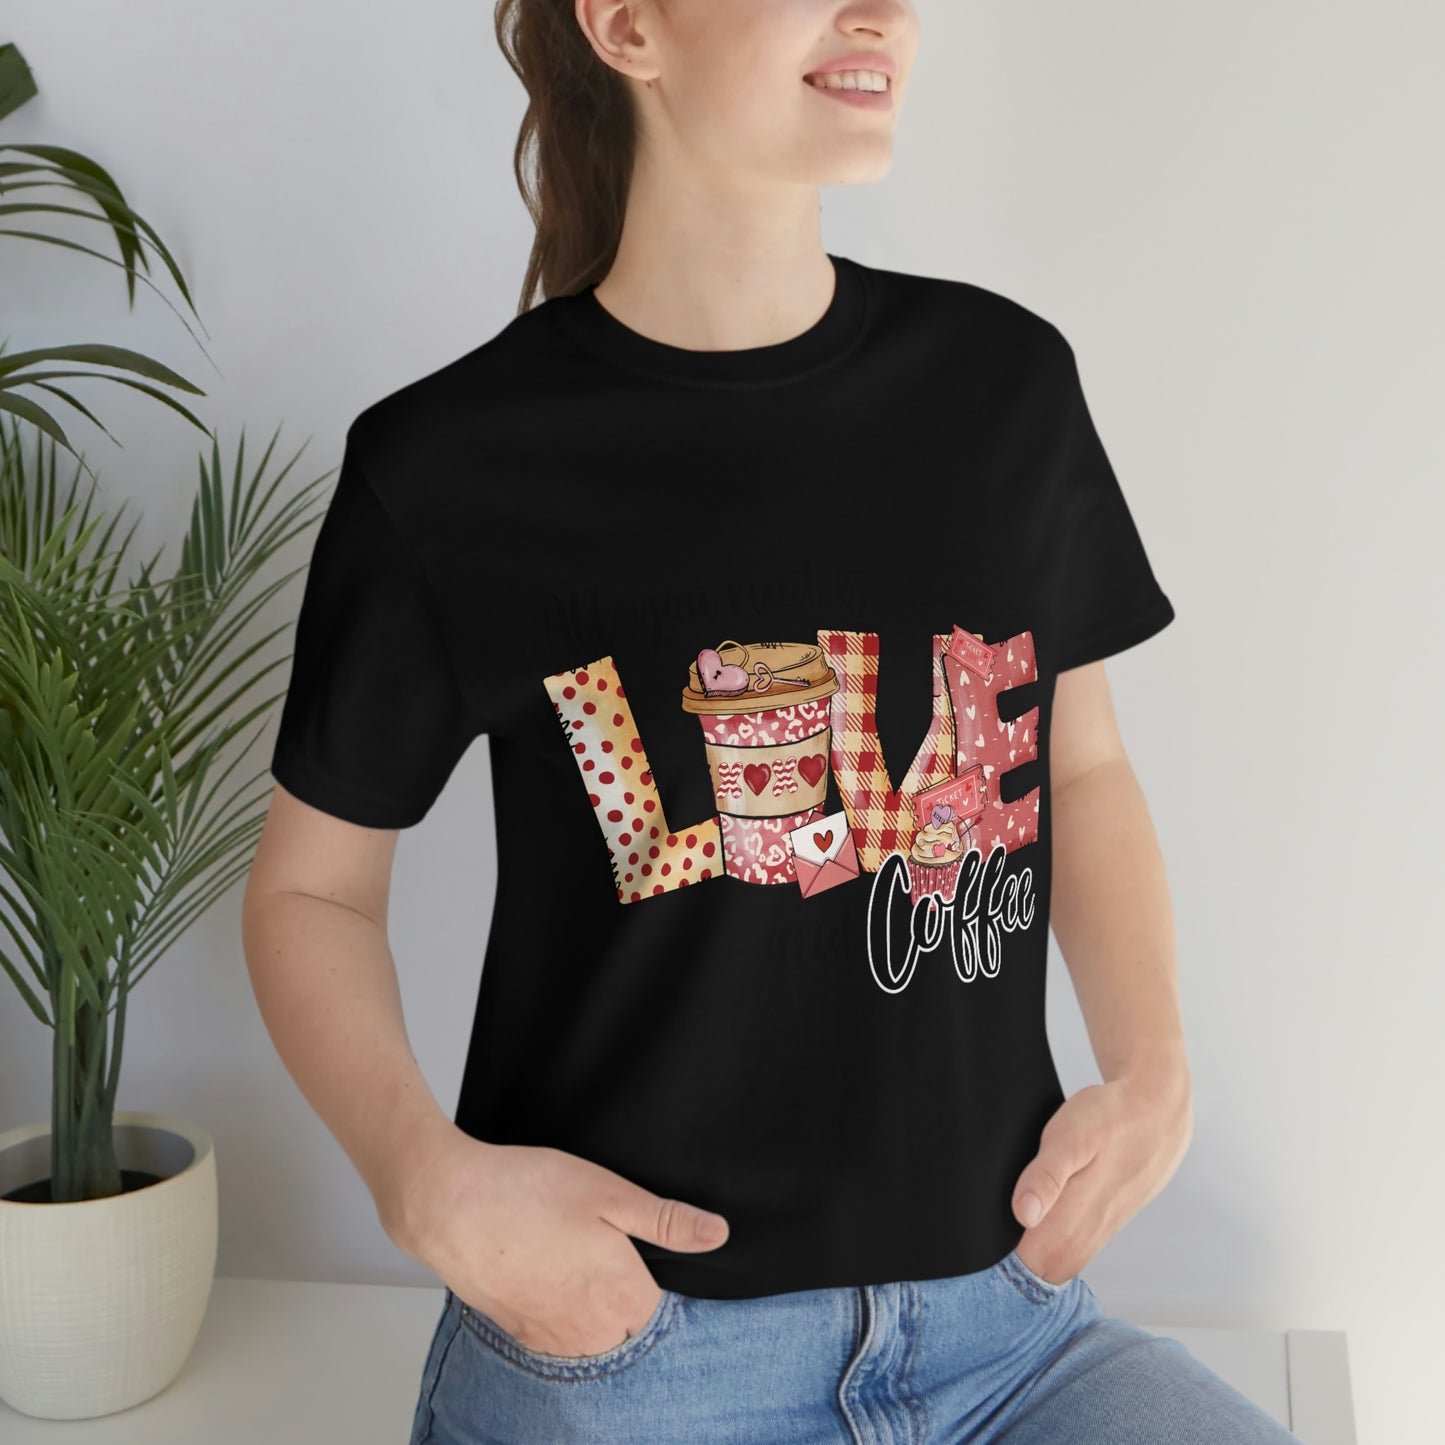 Valentine Day Shirt, Love and Coffee Unisex Jersey Short Sleeve Tee